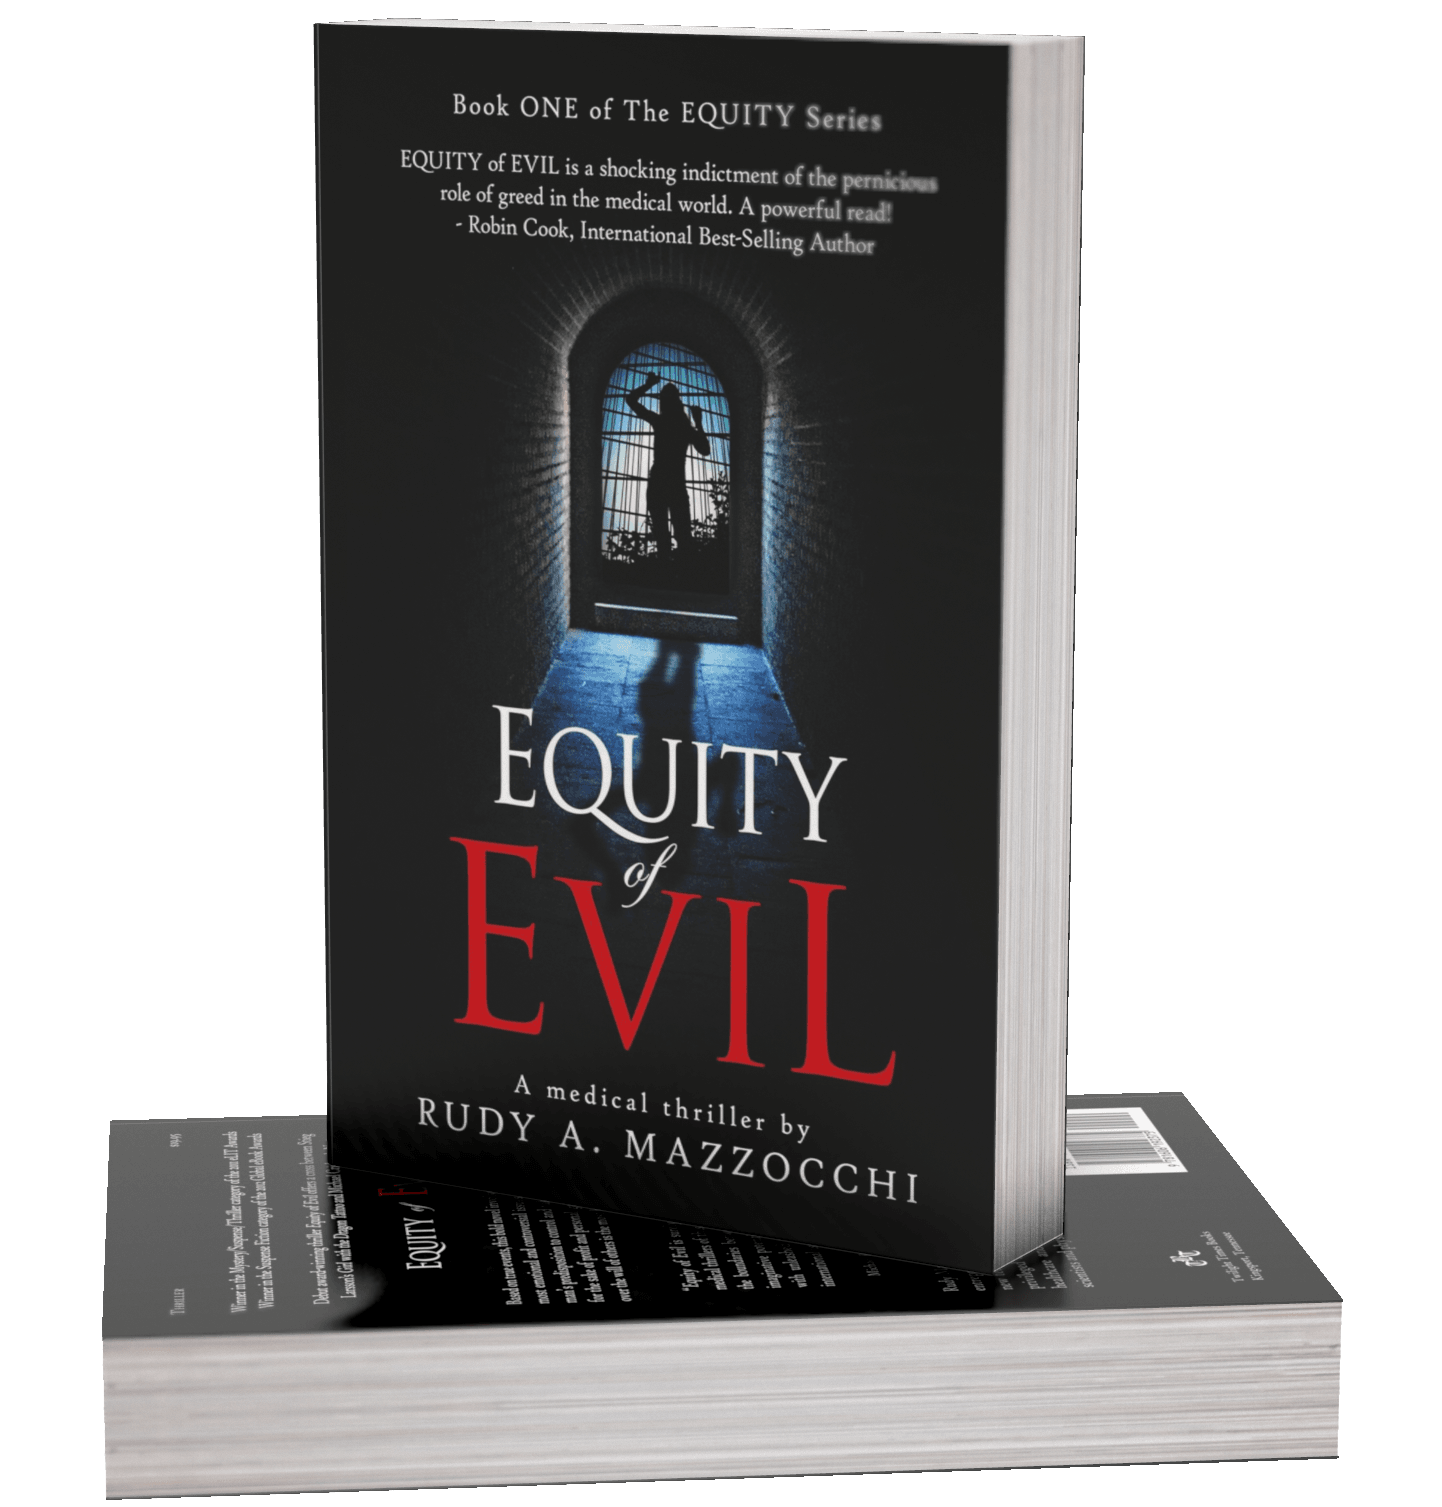 EQUITY OF Evil